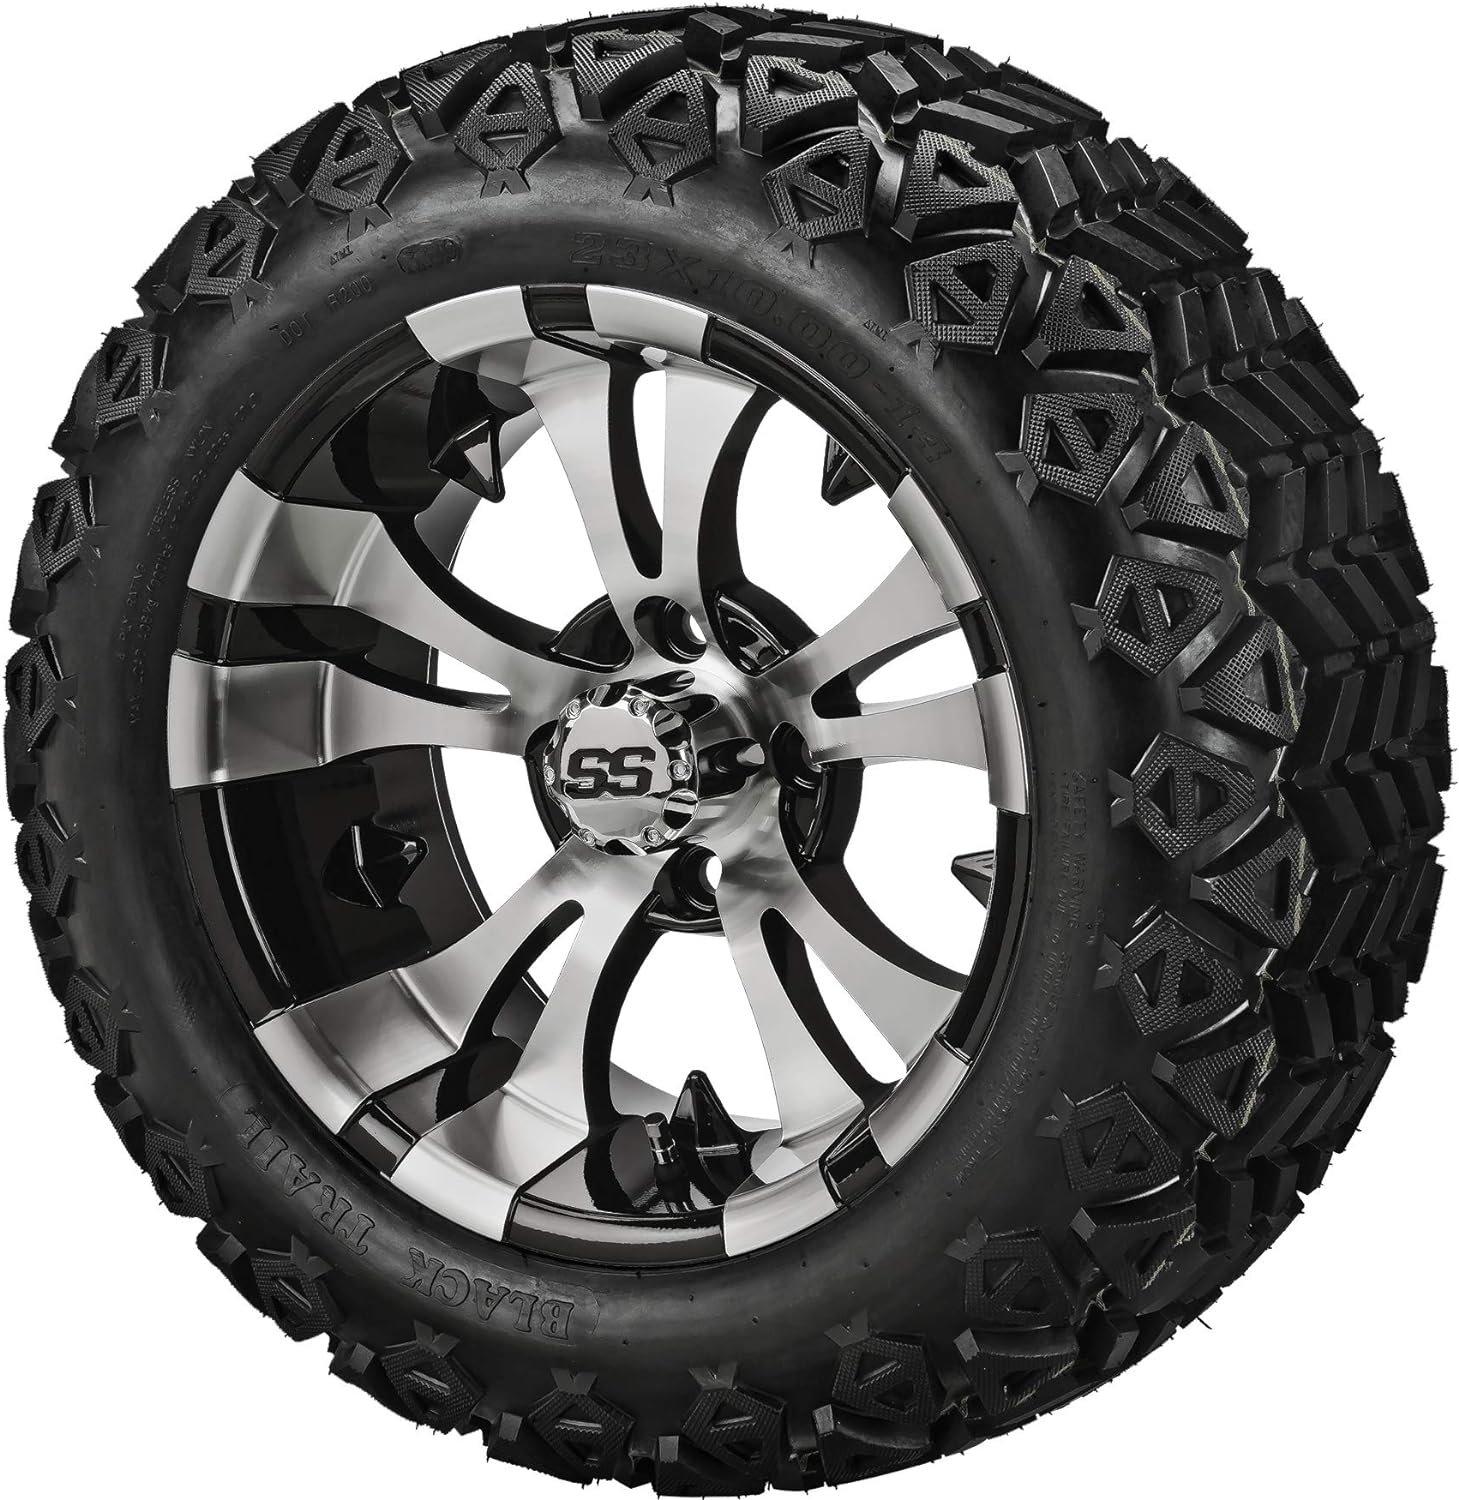 RM Cart - 14 Warlock Black/Machined on 23x10-14 Black Trail Tires (Set of 4), Fits Club Car  EZGo Carts, Golf Cart Tires and Wheels Combo, Can be Used on Lawn Mowers and ATVs